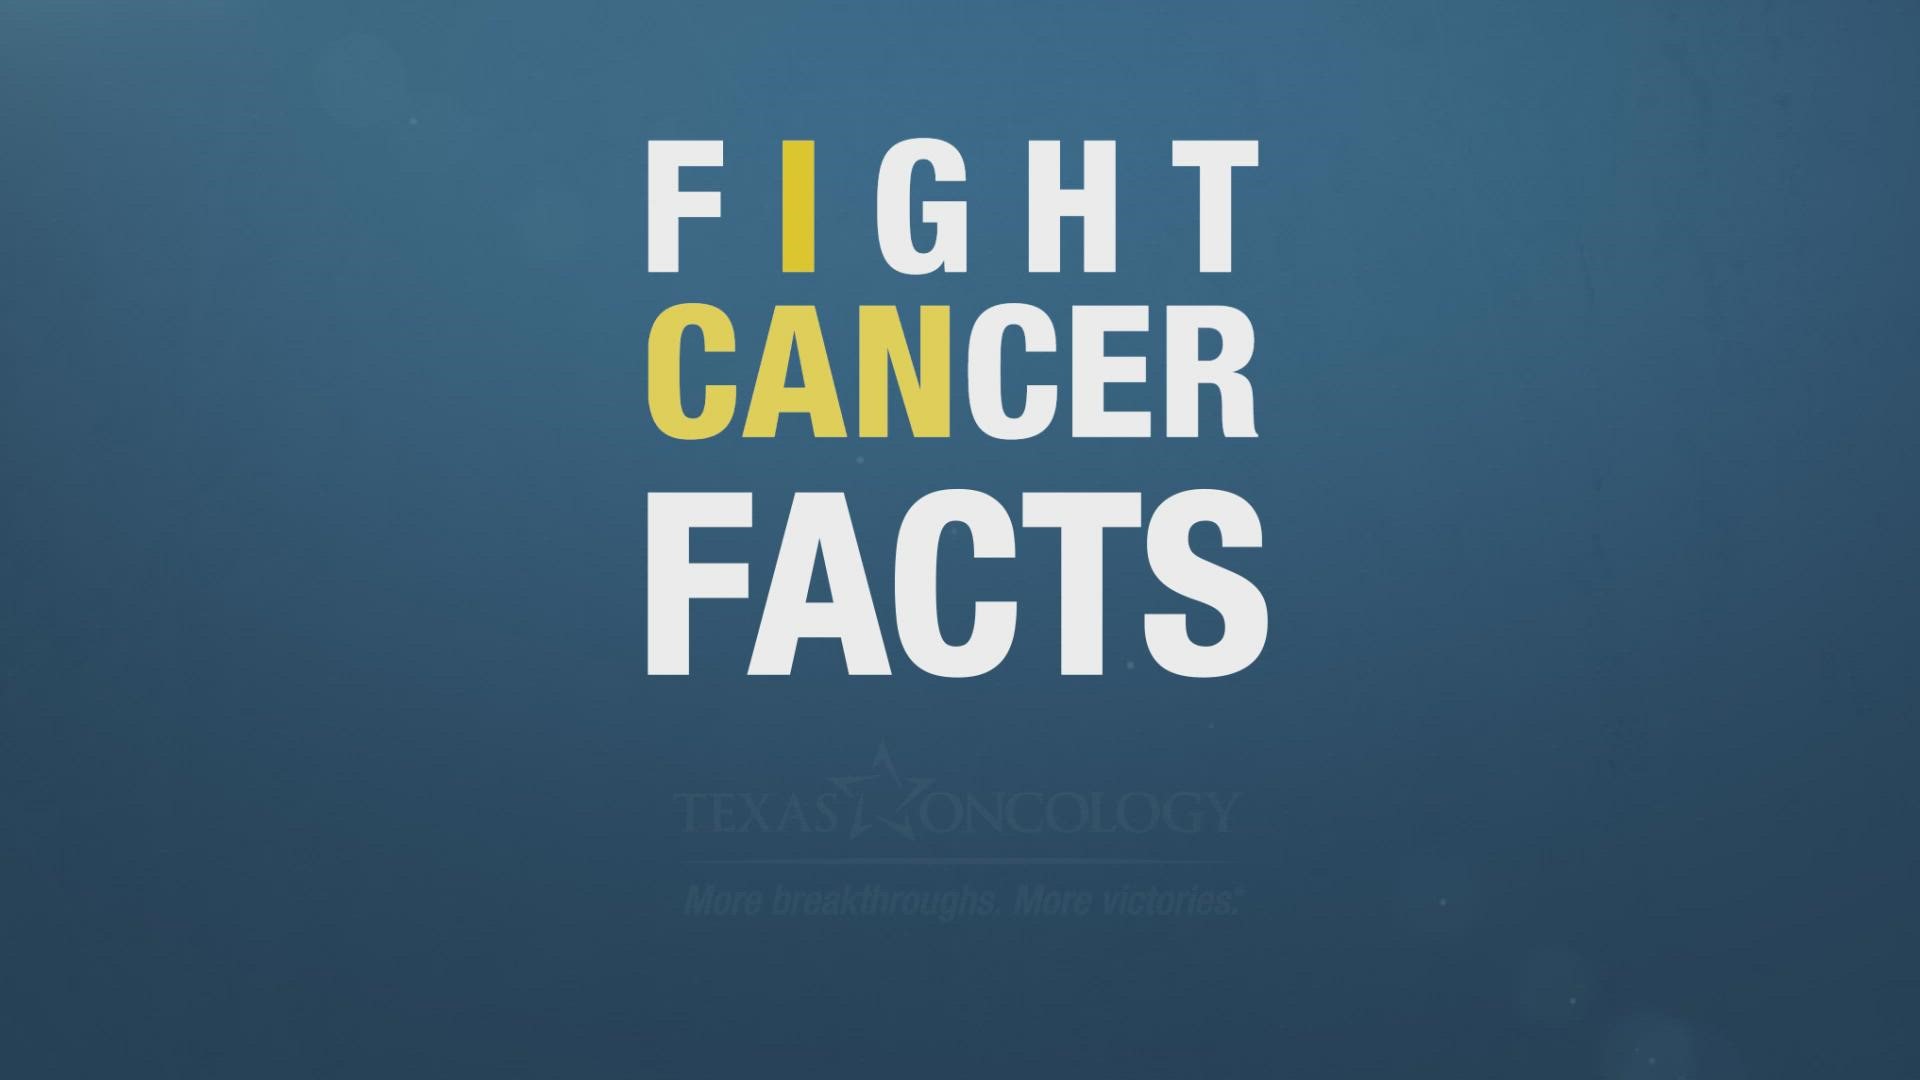 Local Texas Oncology doctor explains the importance of early detection to combat breast cancer.